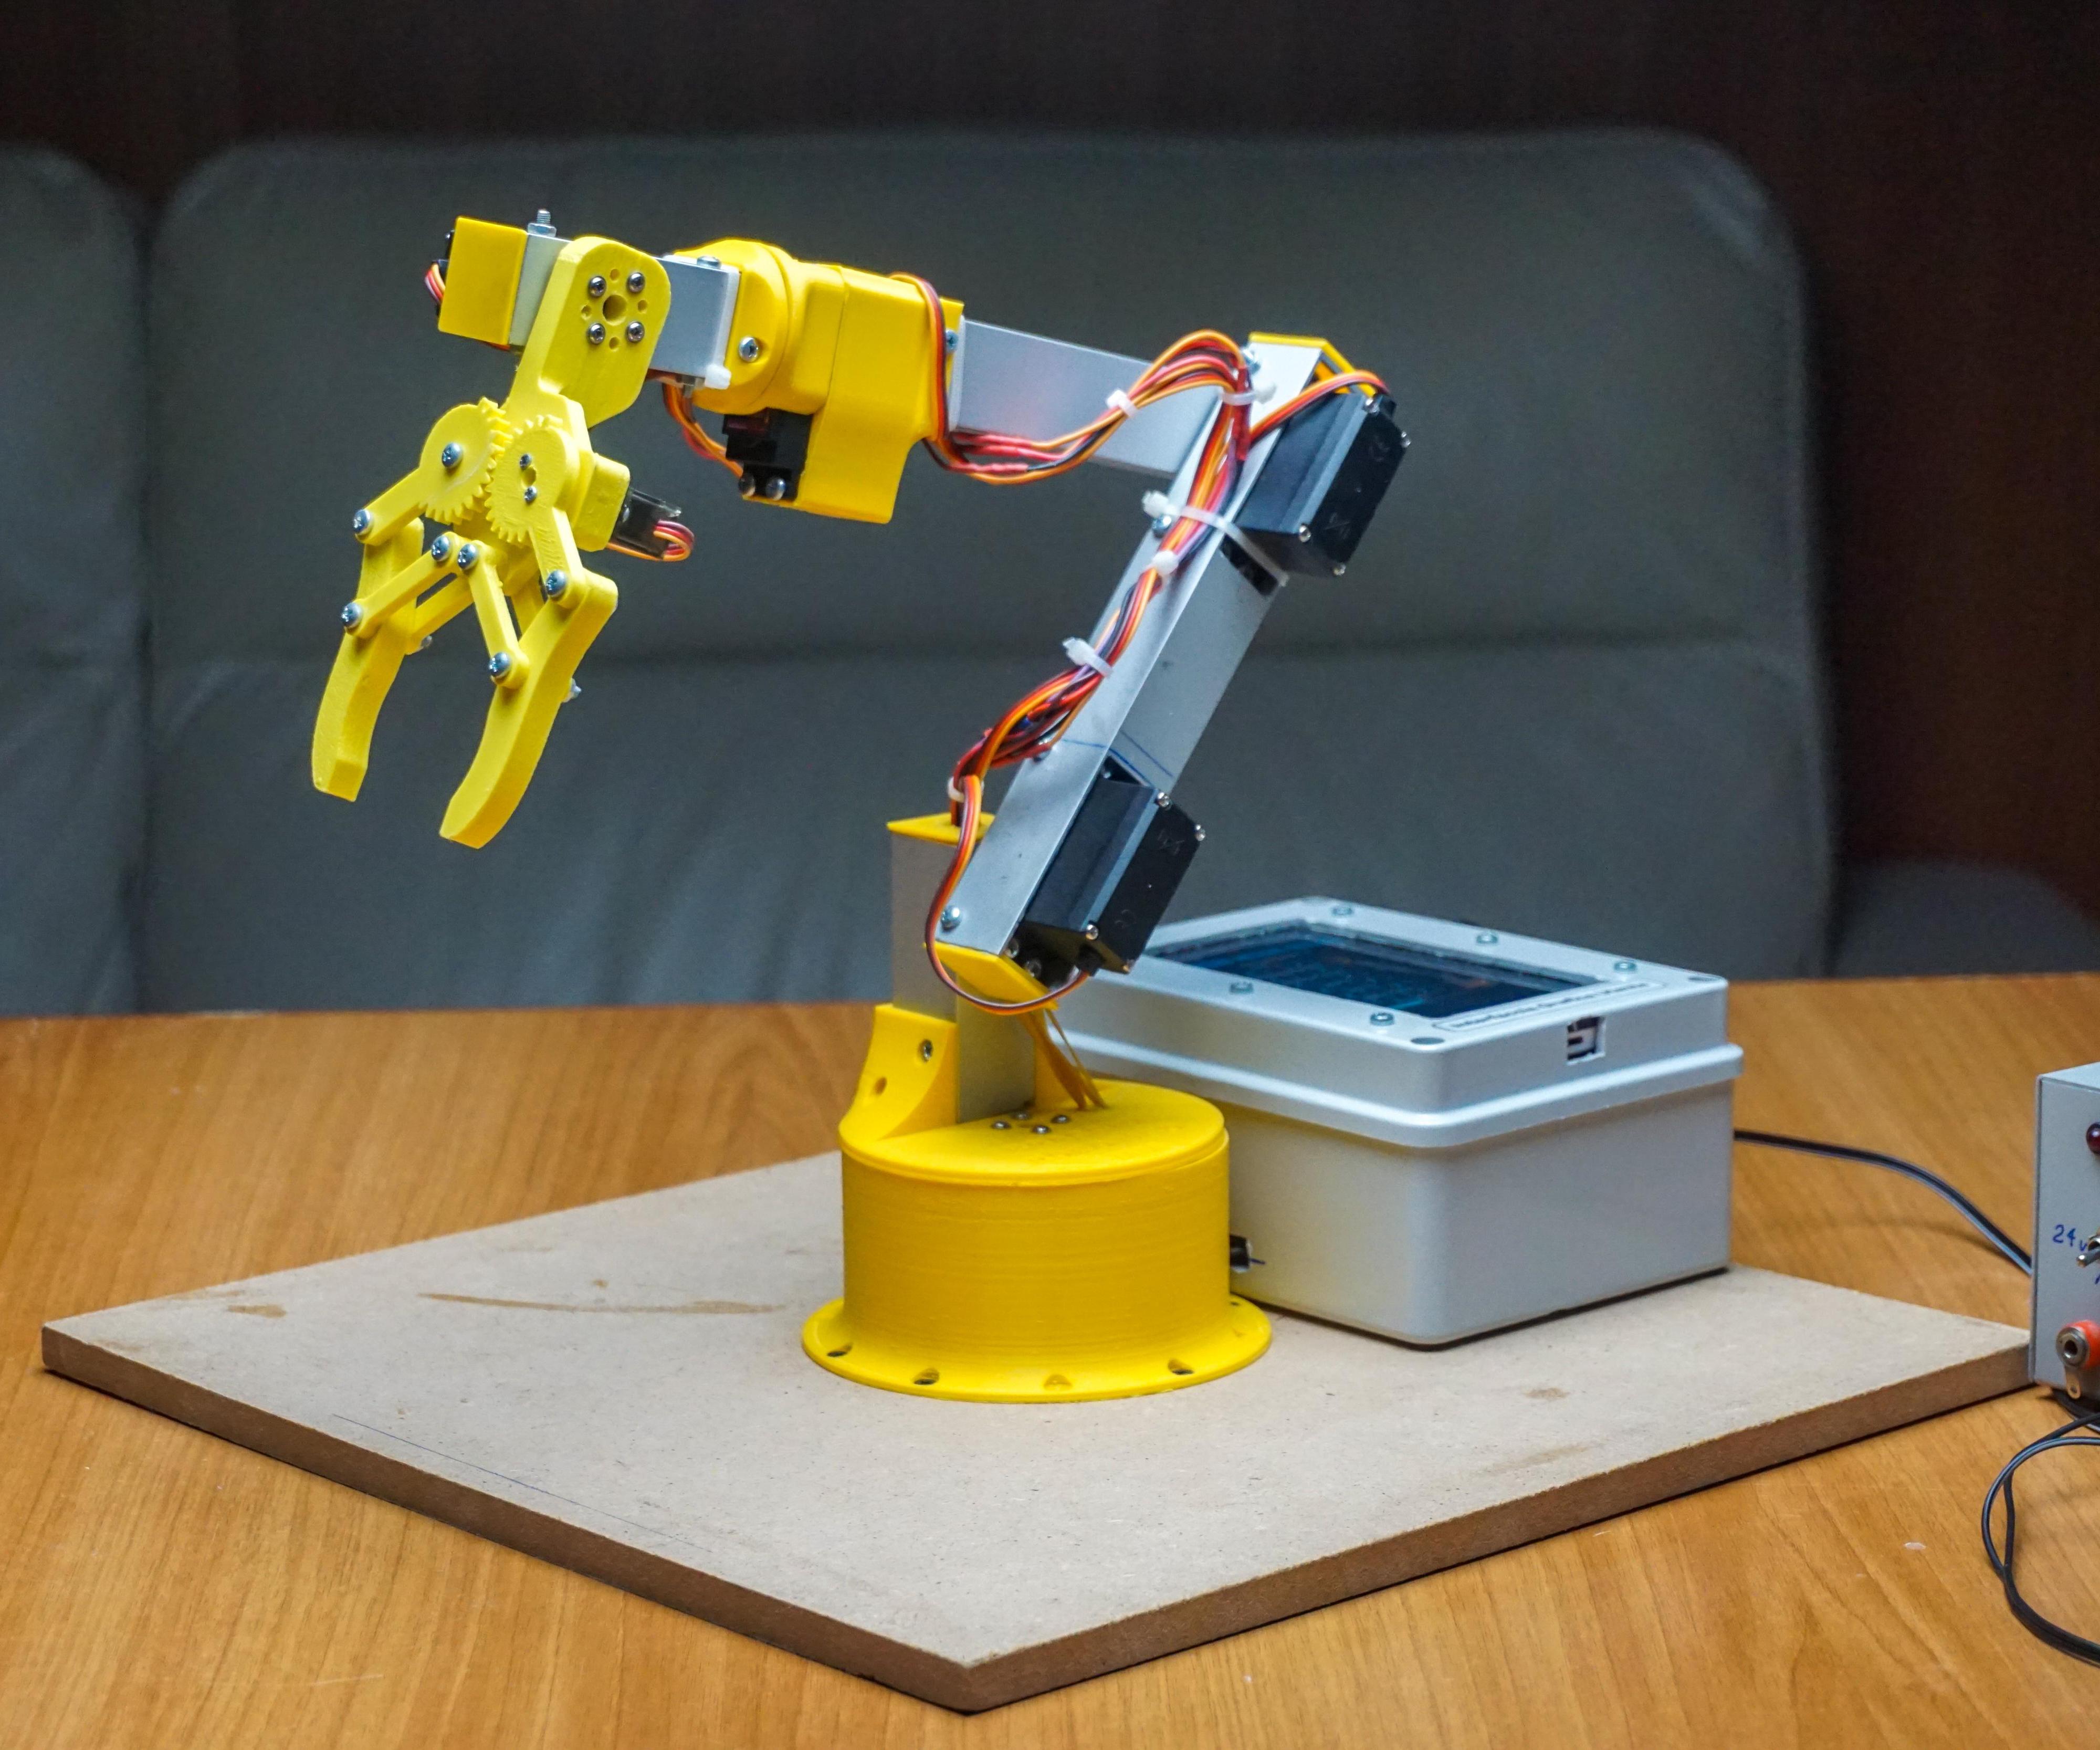 Arduino Robotic Arm Controlled by Touch Interface